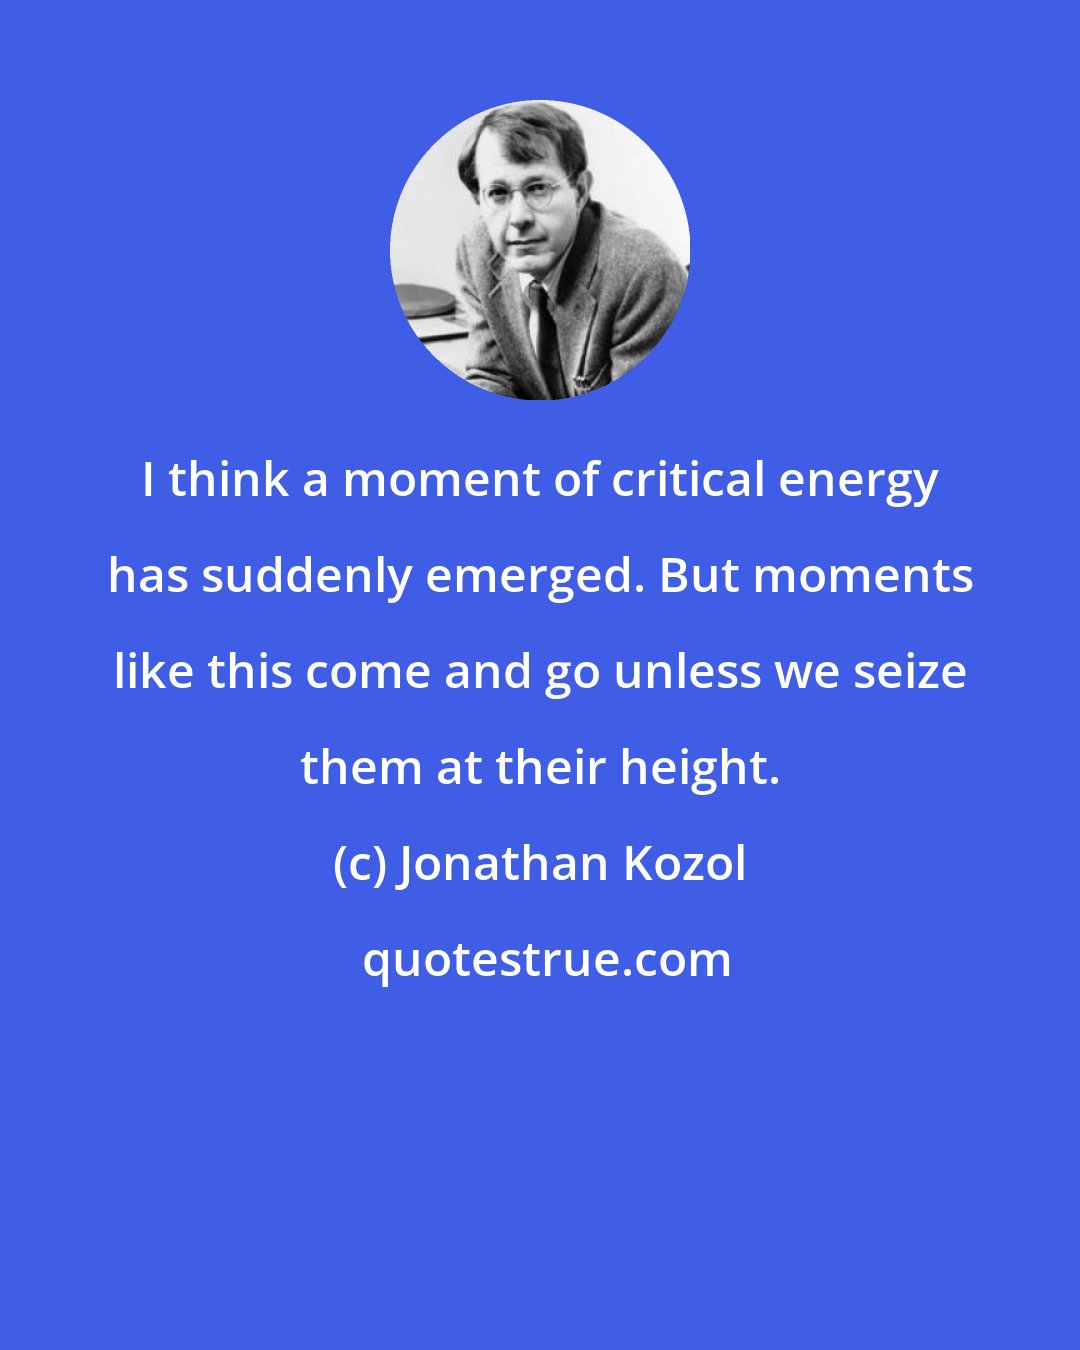 Jonathan Kozol: I think a moment of critical energy has suddenly emerged. But moments like this come and go unless we seize them at their height.